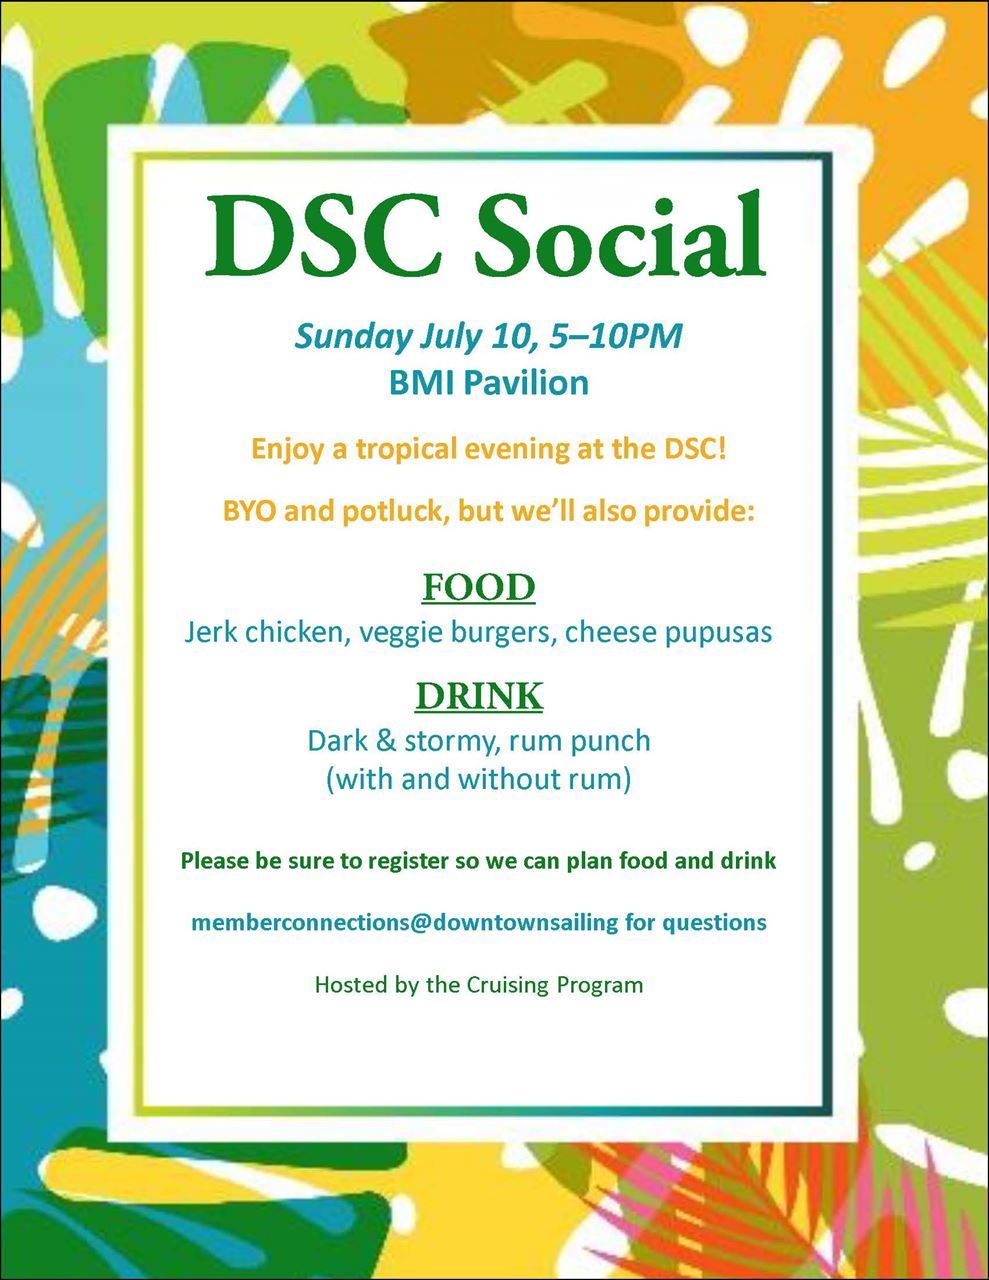 DSC Social Sunday July 10, 5–10PM, BMI Pavilion, Enjoy a tropical evening at the DSC! BYO and potluck, but we’ll also provide: FOOD Jerk chicken, veggie burgers, cheese pupusas ; DRINK: Dark & stormy, rum punch (with and without rum) . Please be sure to register so we can plan food and drink . memberconnections@downtownsailing for questions. Hosted by the cruising council